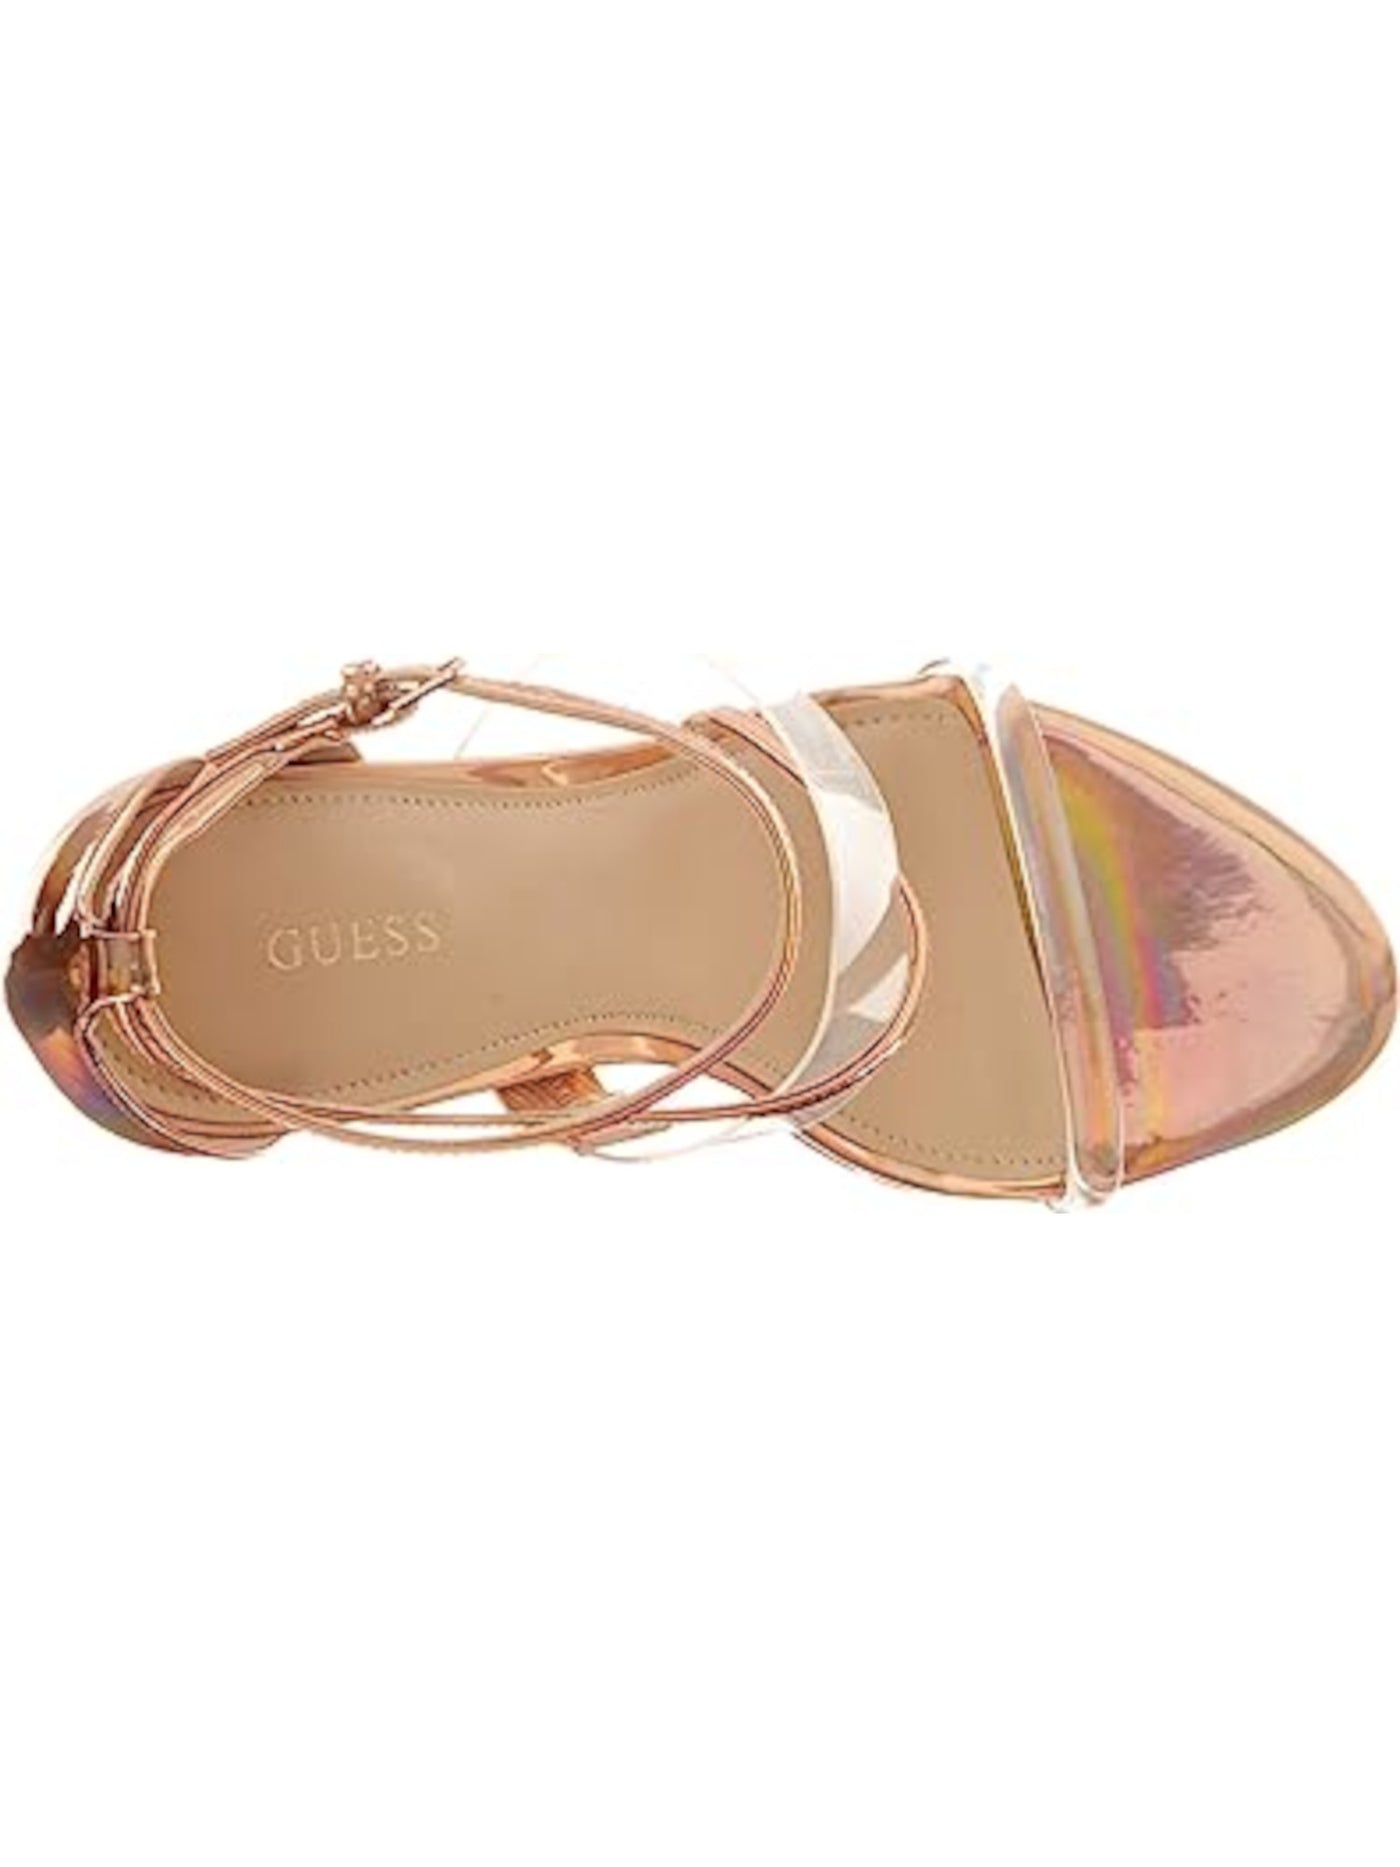 GUESS Womens Beige Padded Transparent Strappy Iridescent Adjustable Strap Ankle Strap Felecia Almond Toe Stiletto Buckle Heeled Sandal 11 M